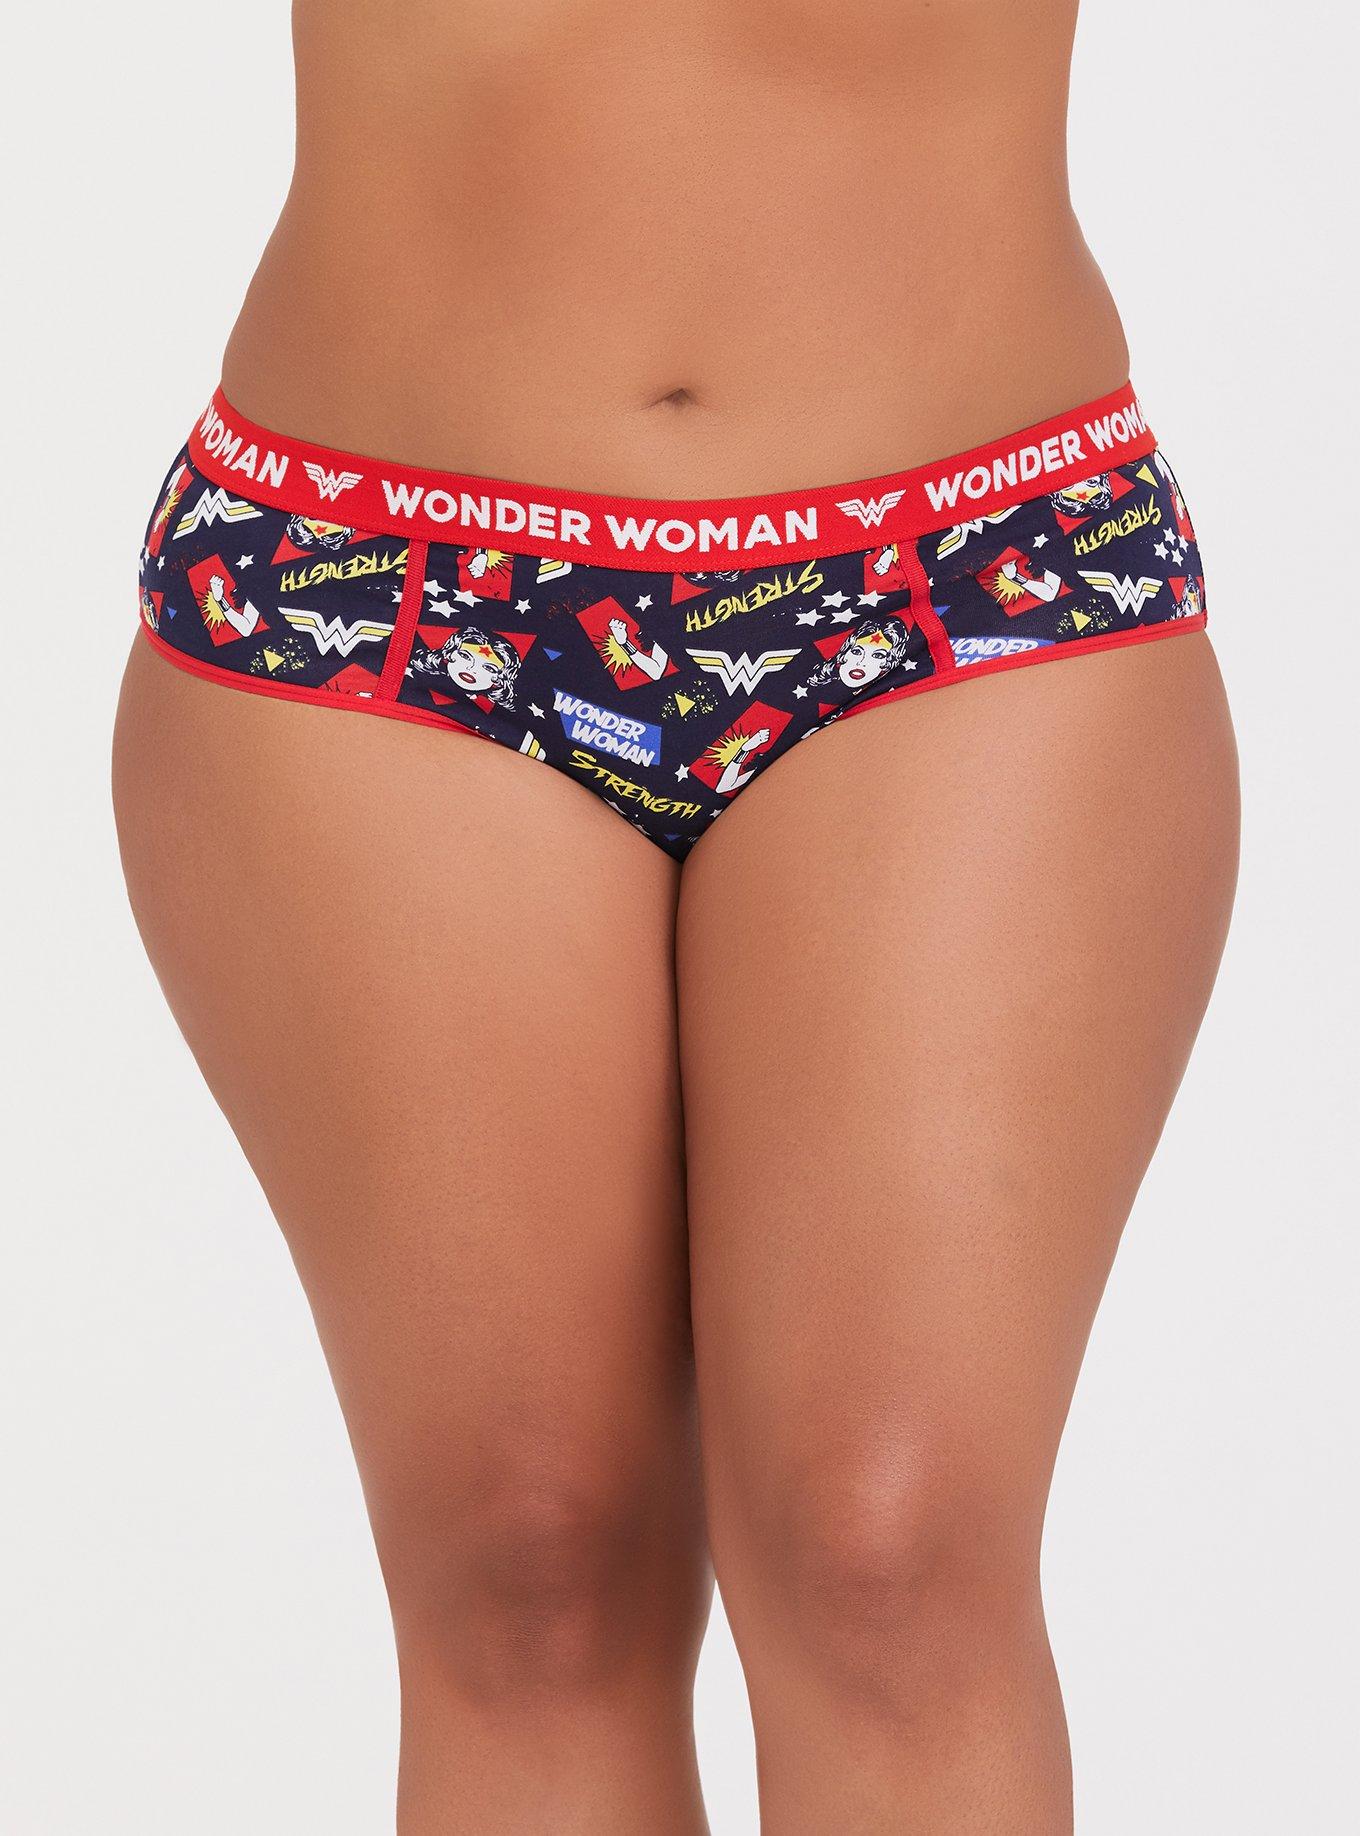 Wholesale wonder woman underwear In Sexy And Comfortable Styles 